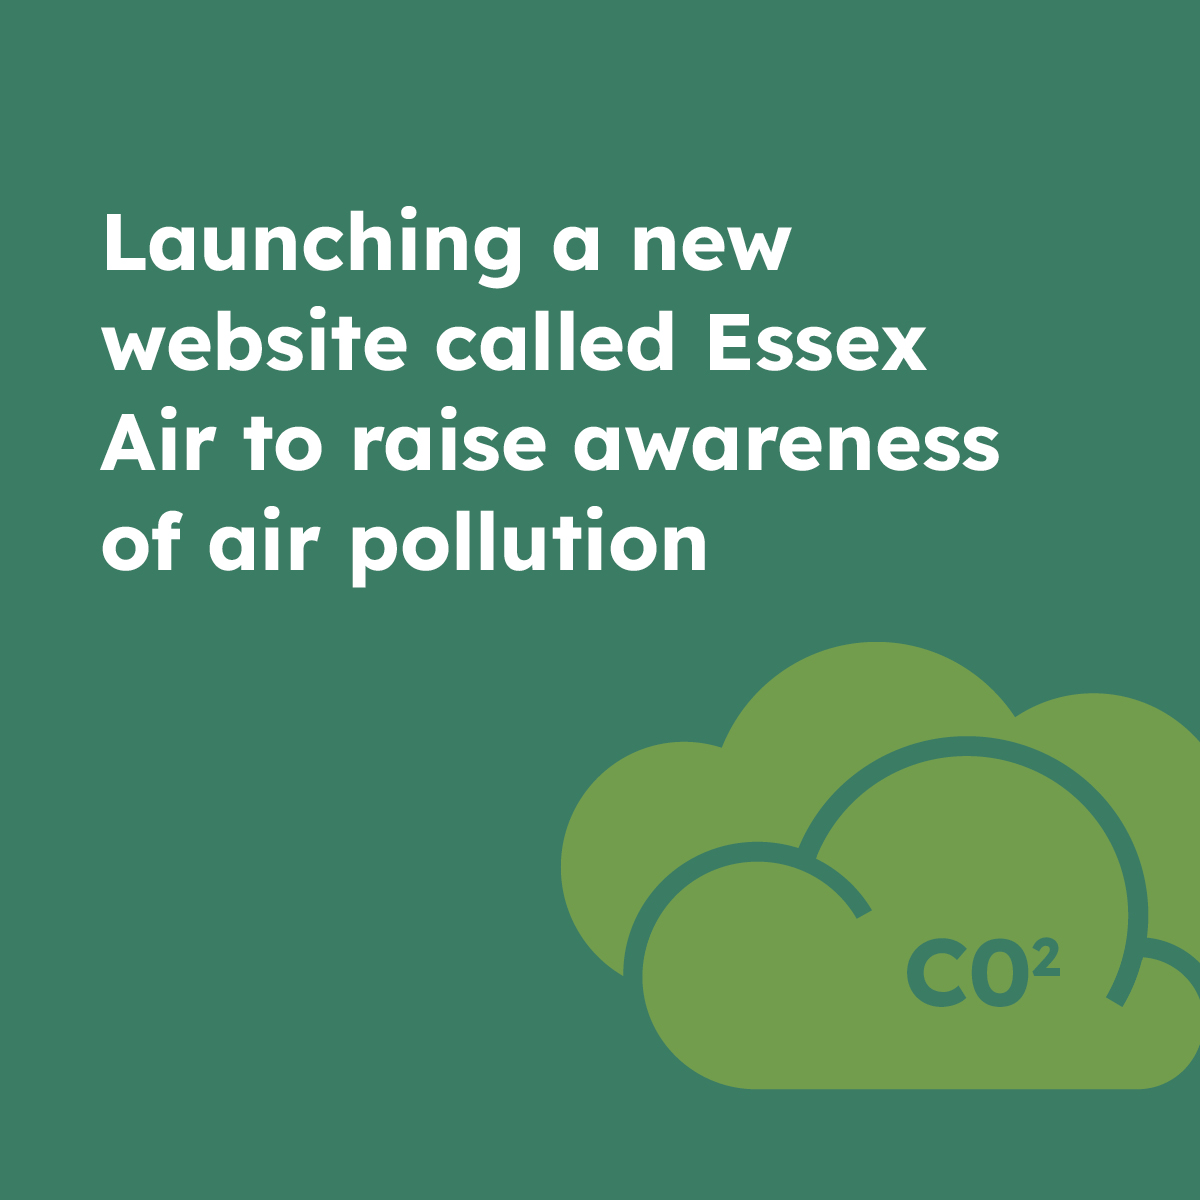 Launching a new website called Essex Air to raise awareness of air pollution